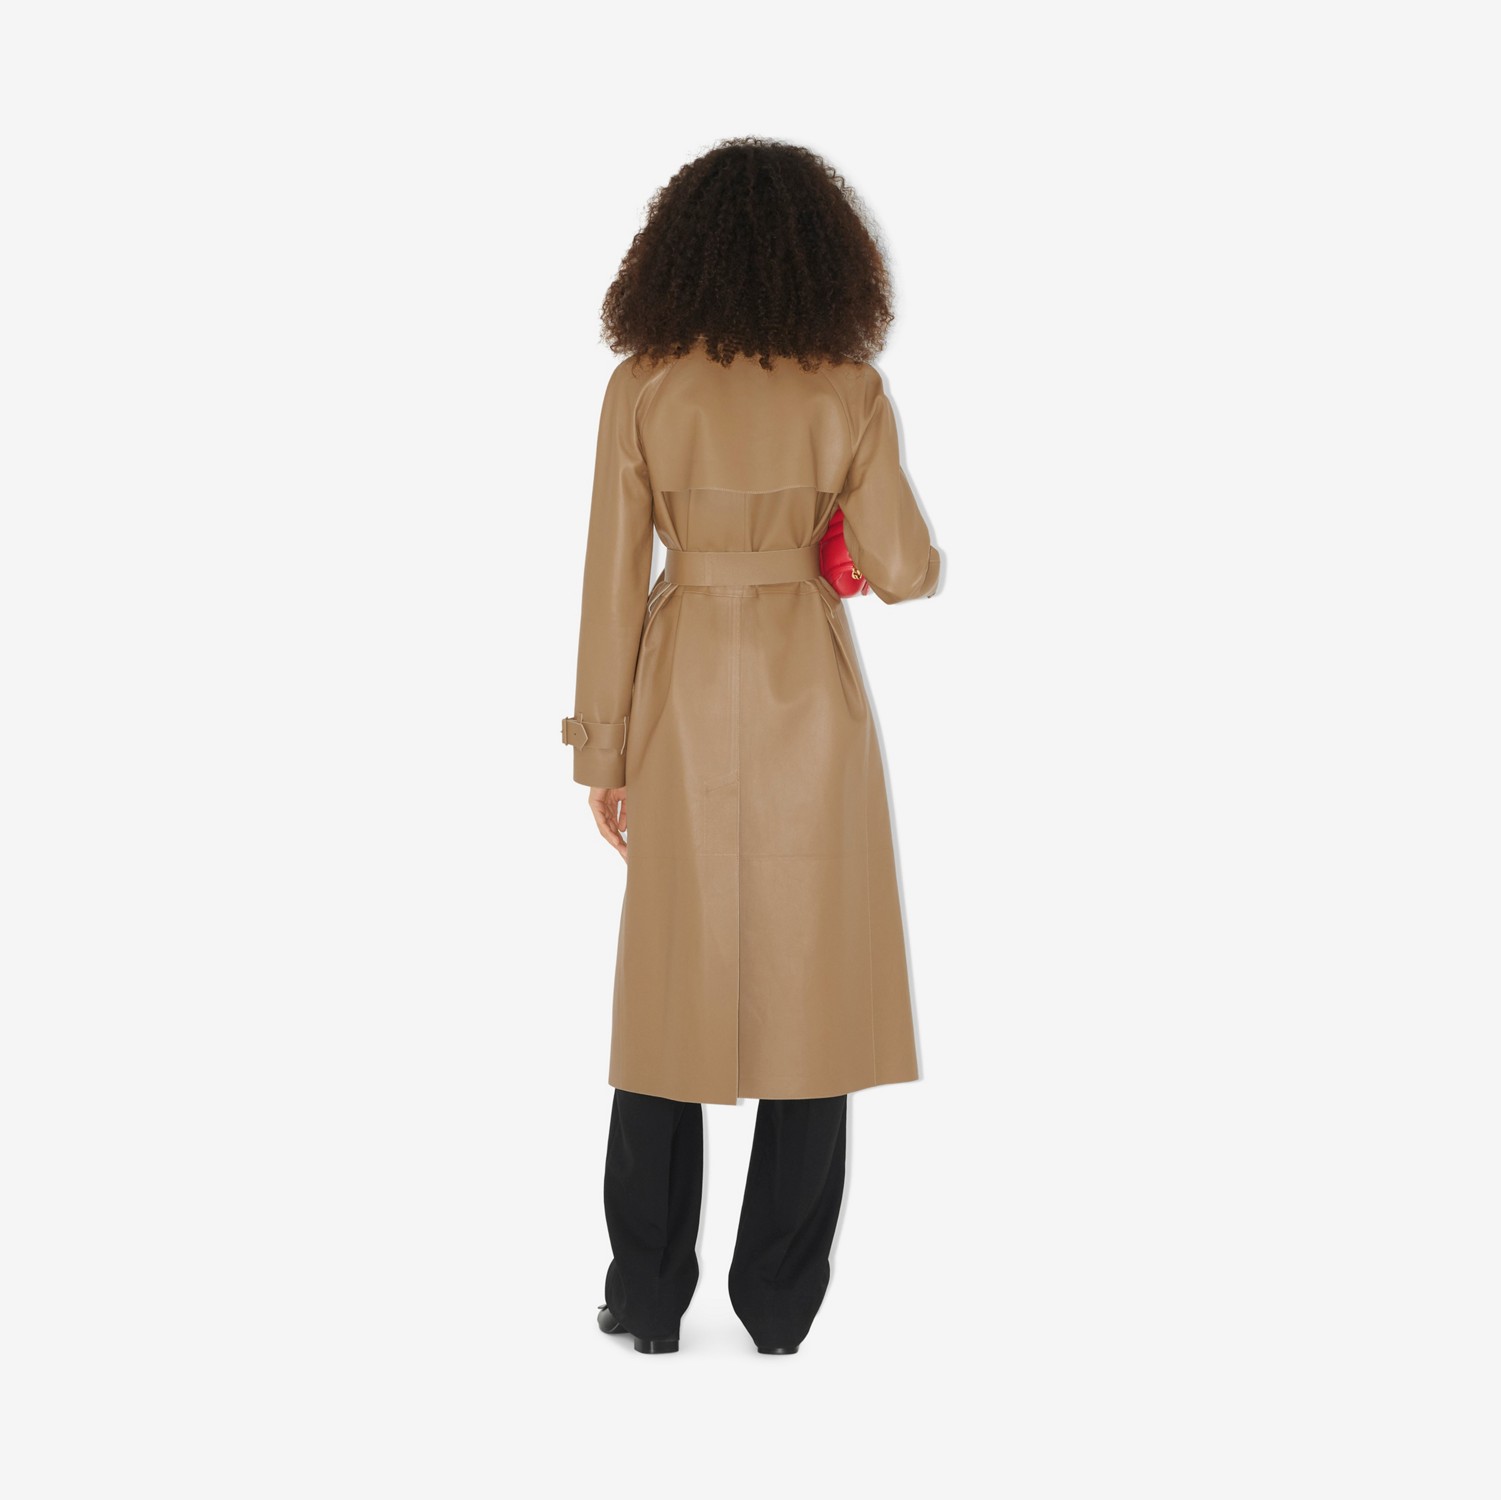 Trench Coat Waterloo em couro (Camel) - Mulheres | Burberry® oficial